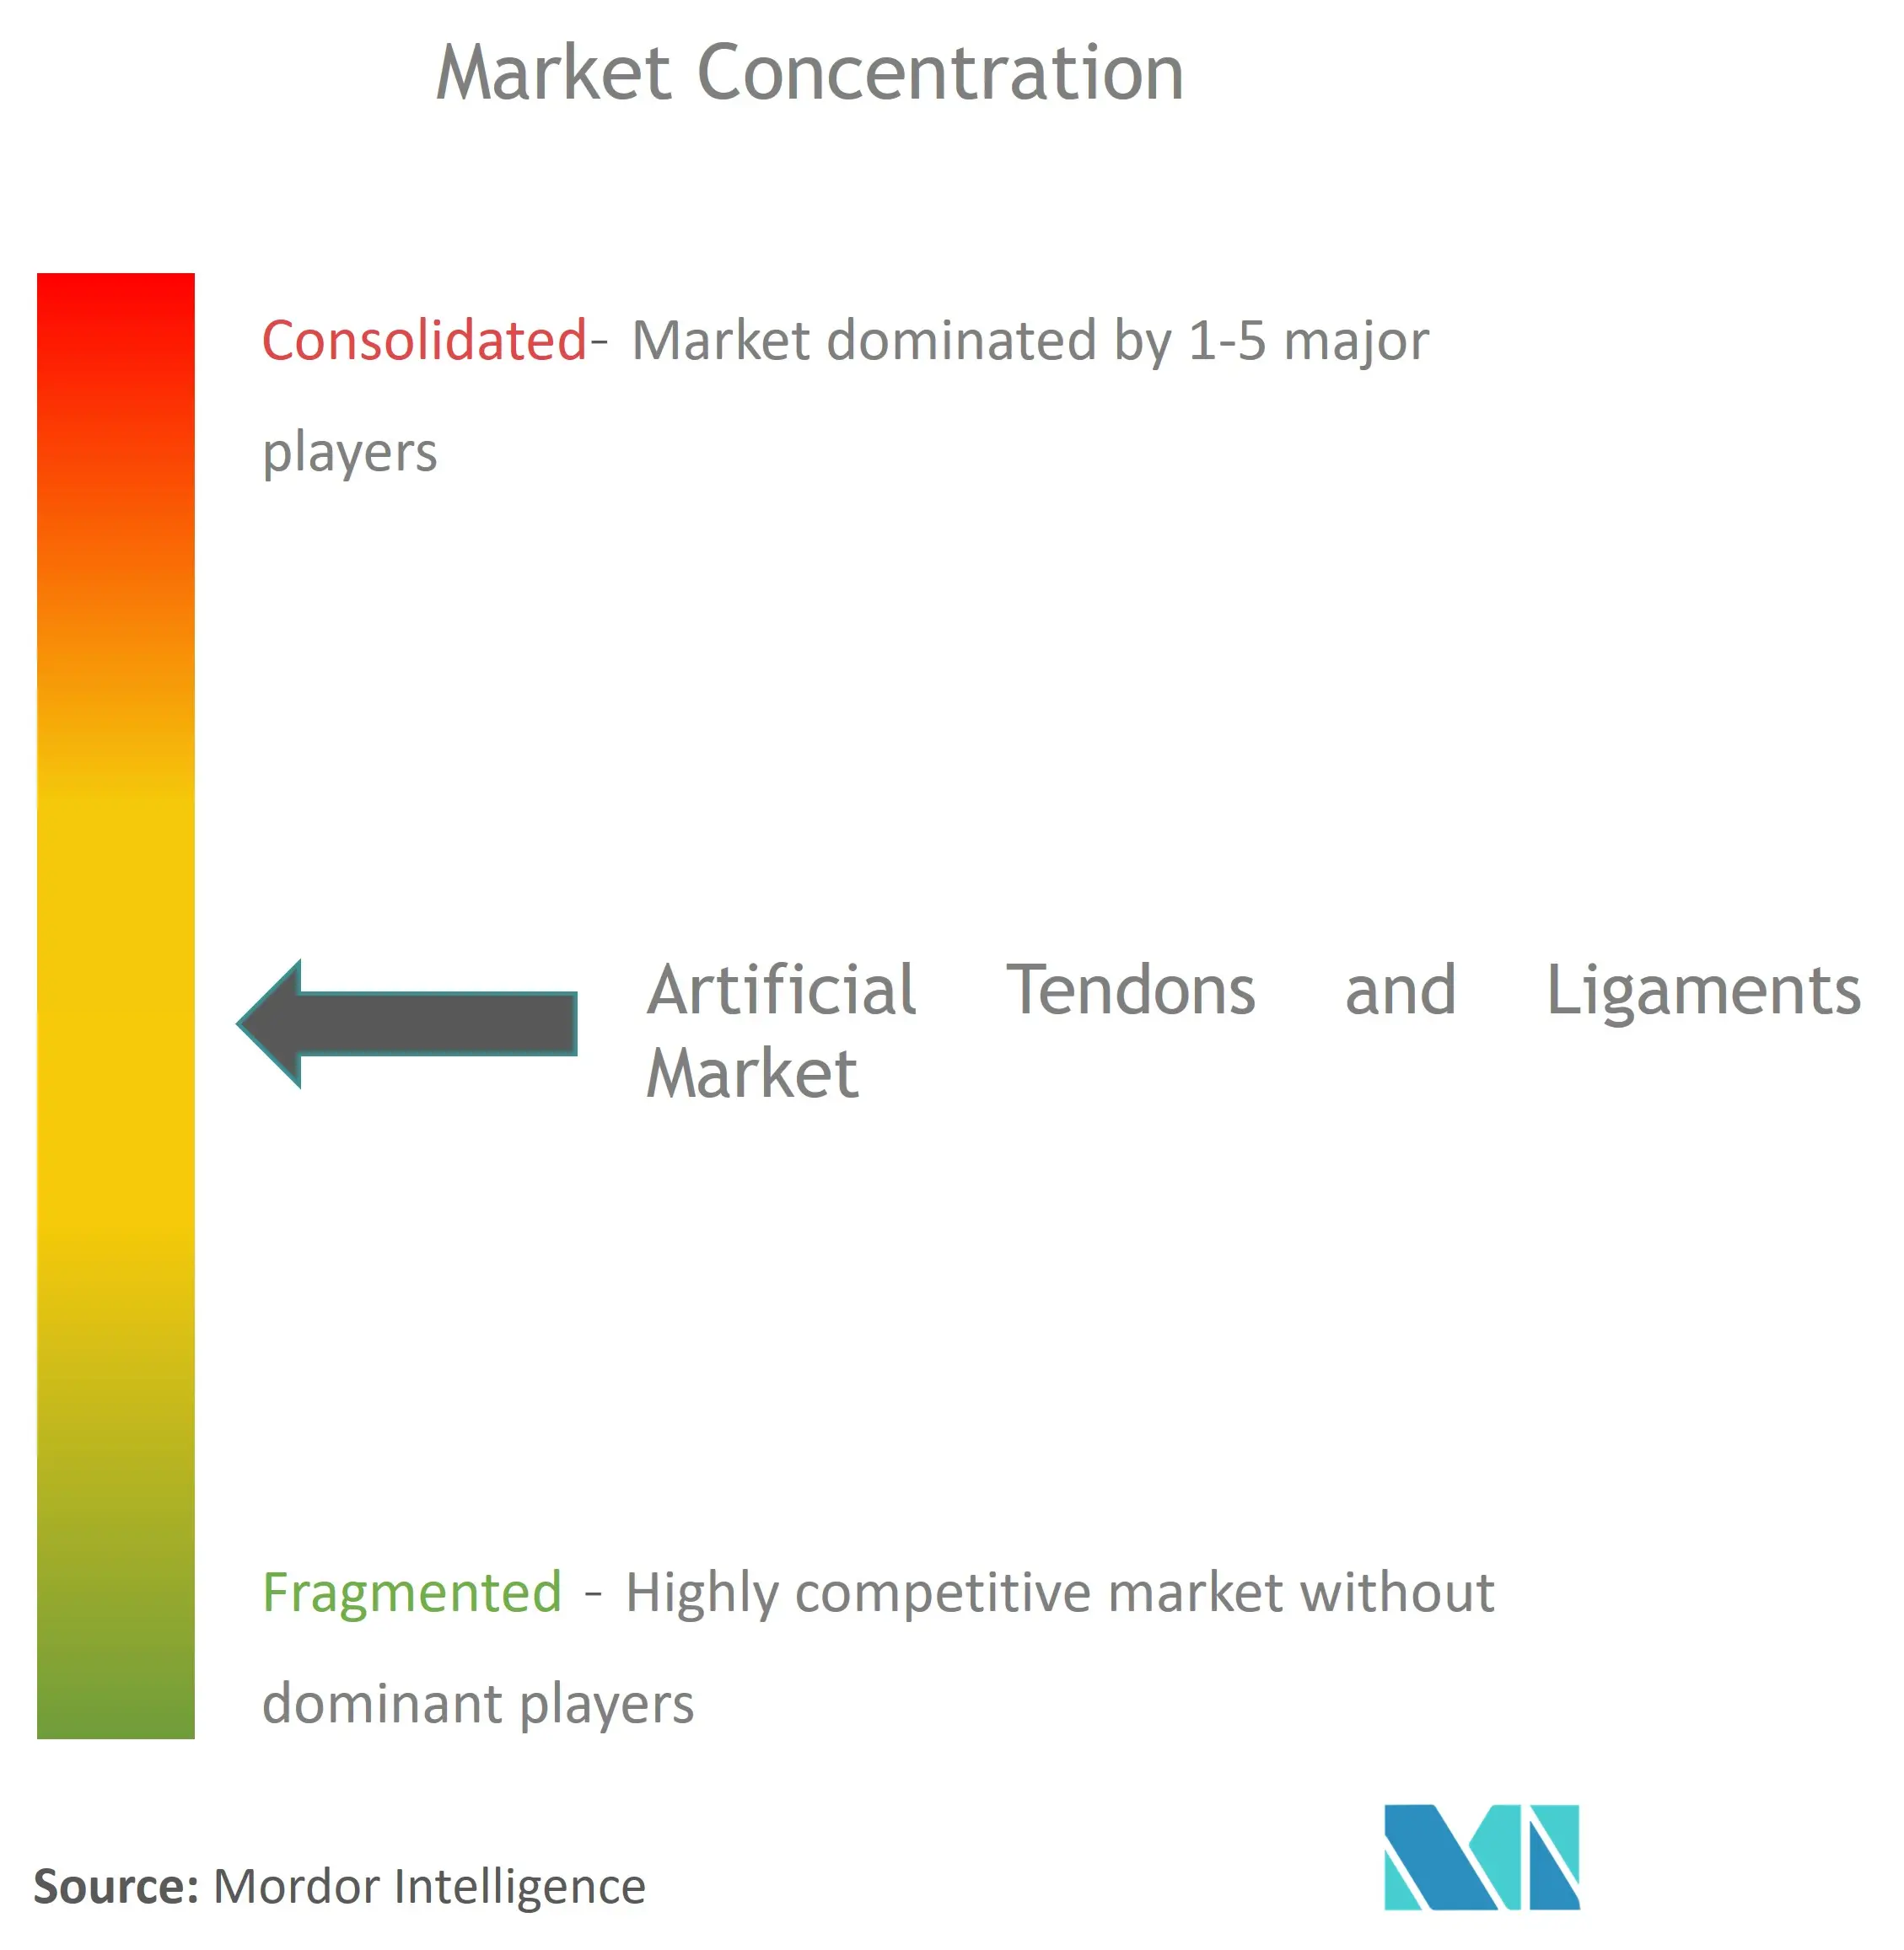 Artificial Tendons and Ligaments Market Concentration